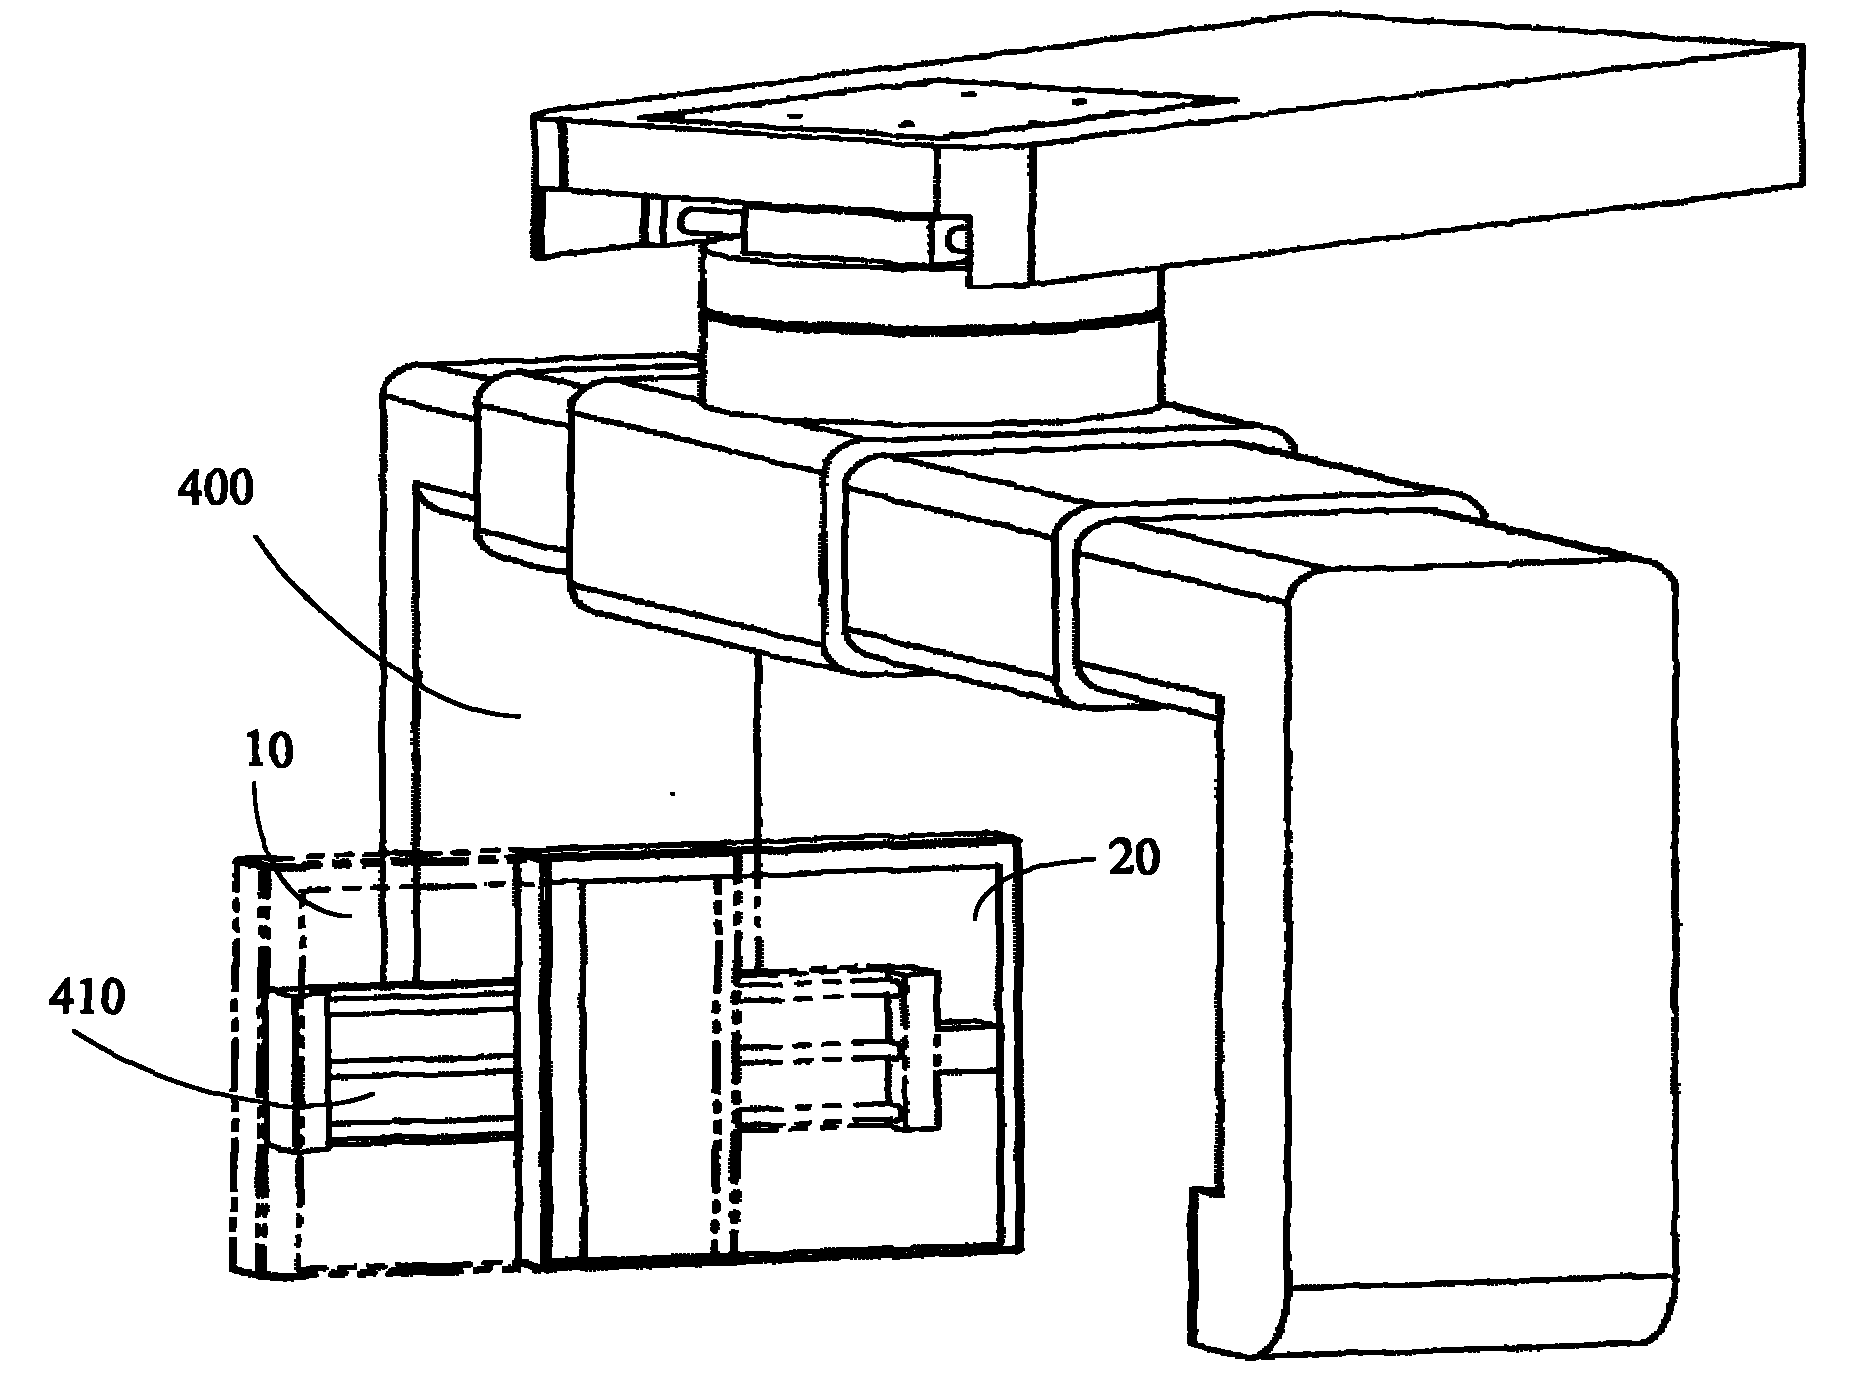 Adjusting device of X-ray imaging equipment